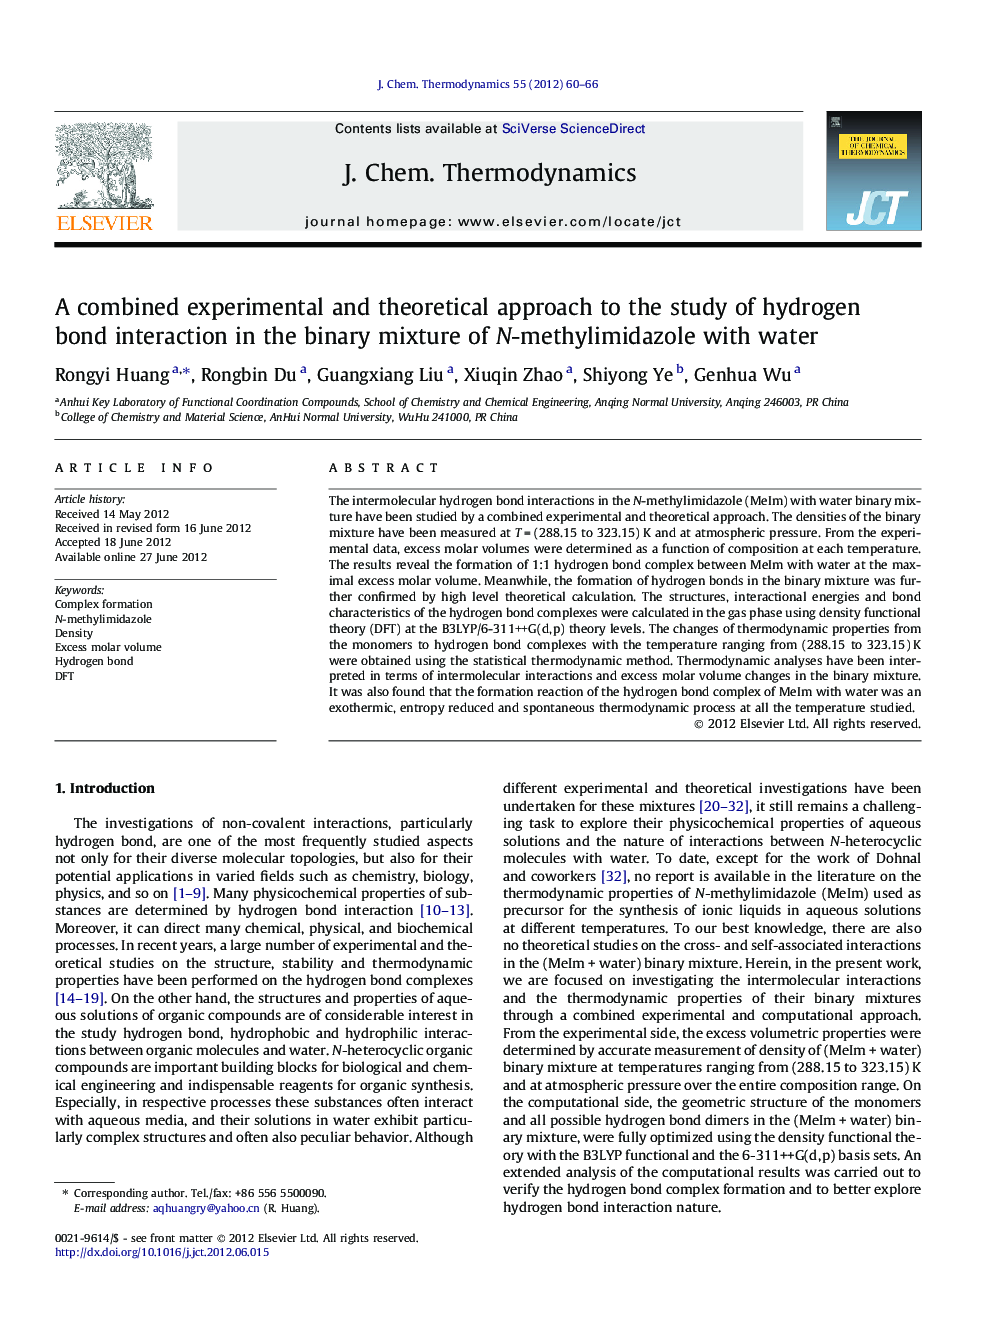 A combined experimental and theoretical approach to the study of hydrogen bond interaction in the binary mixture of N-methylimidazole with water